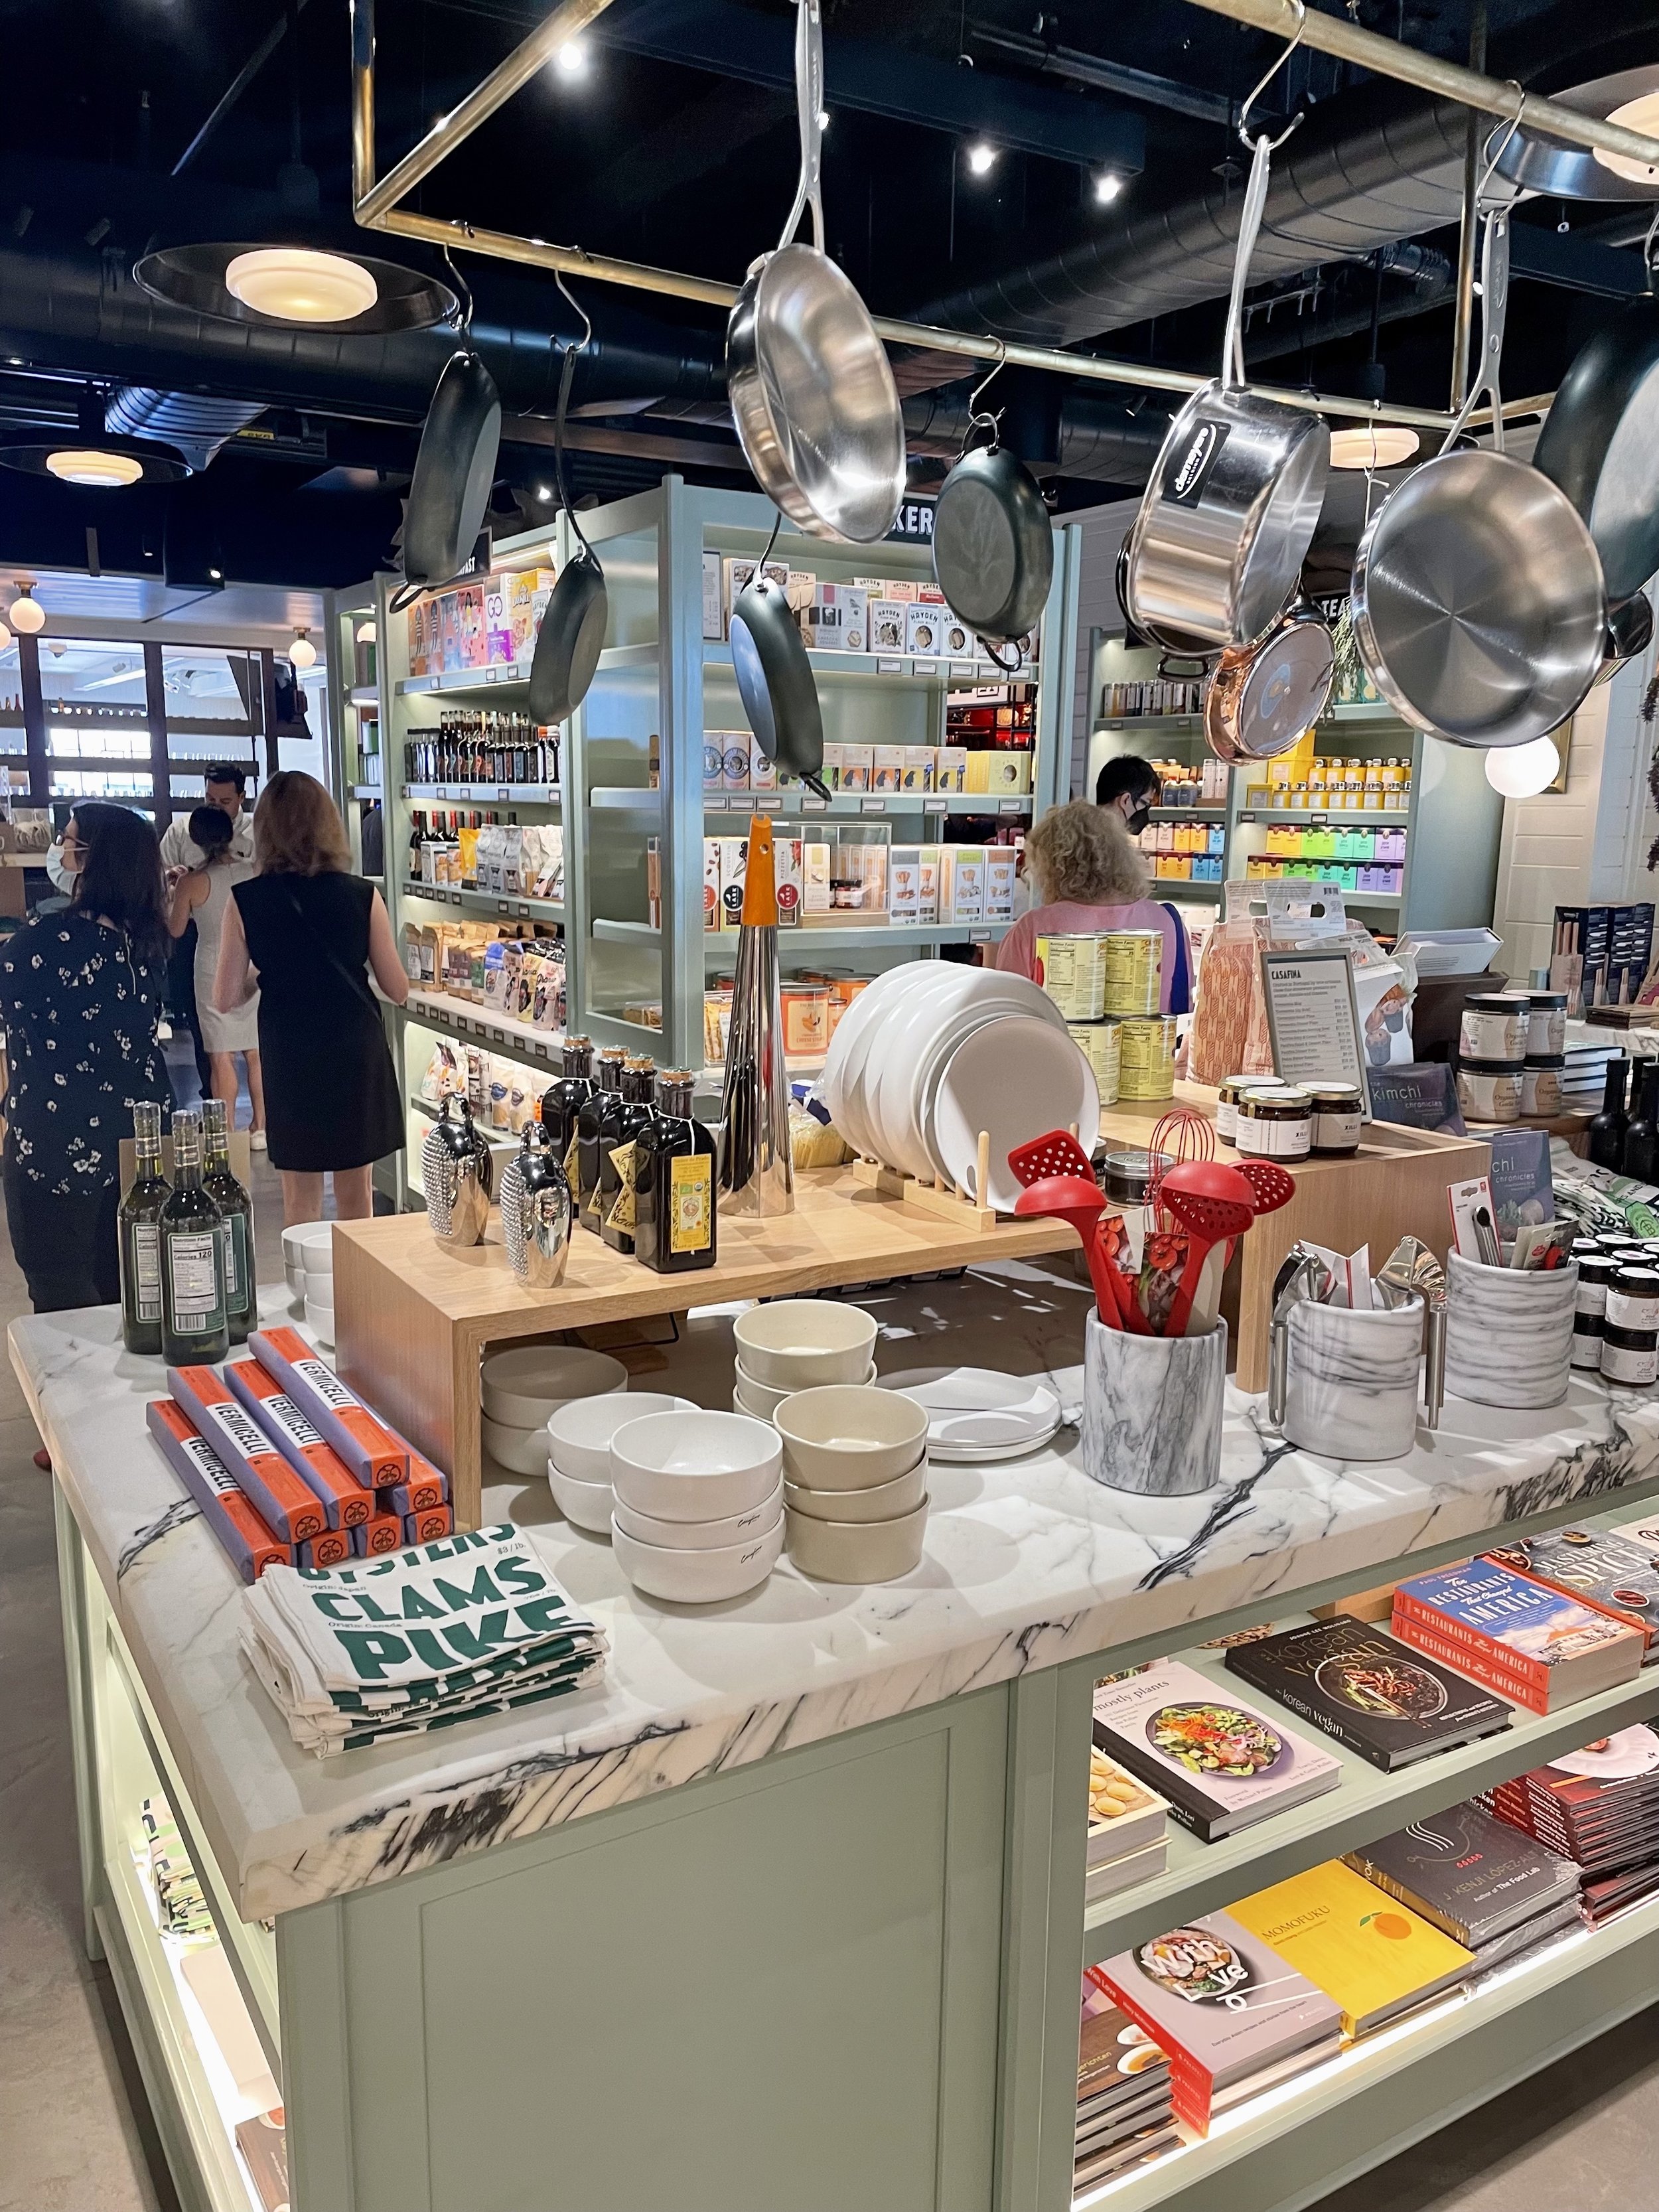 The upstairs Jean-Georges approved kitchenware booth